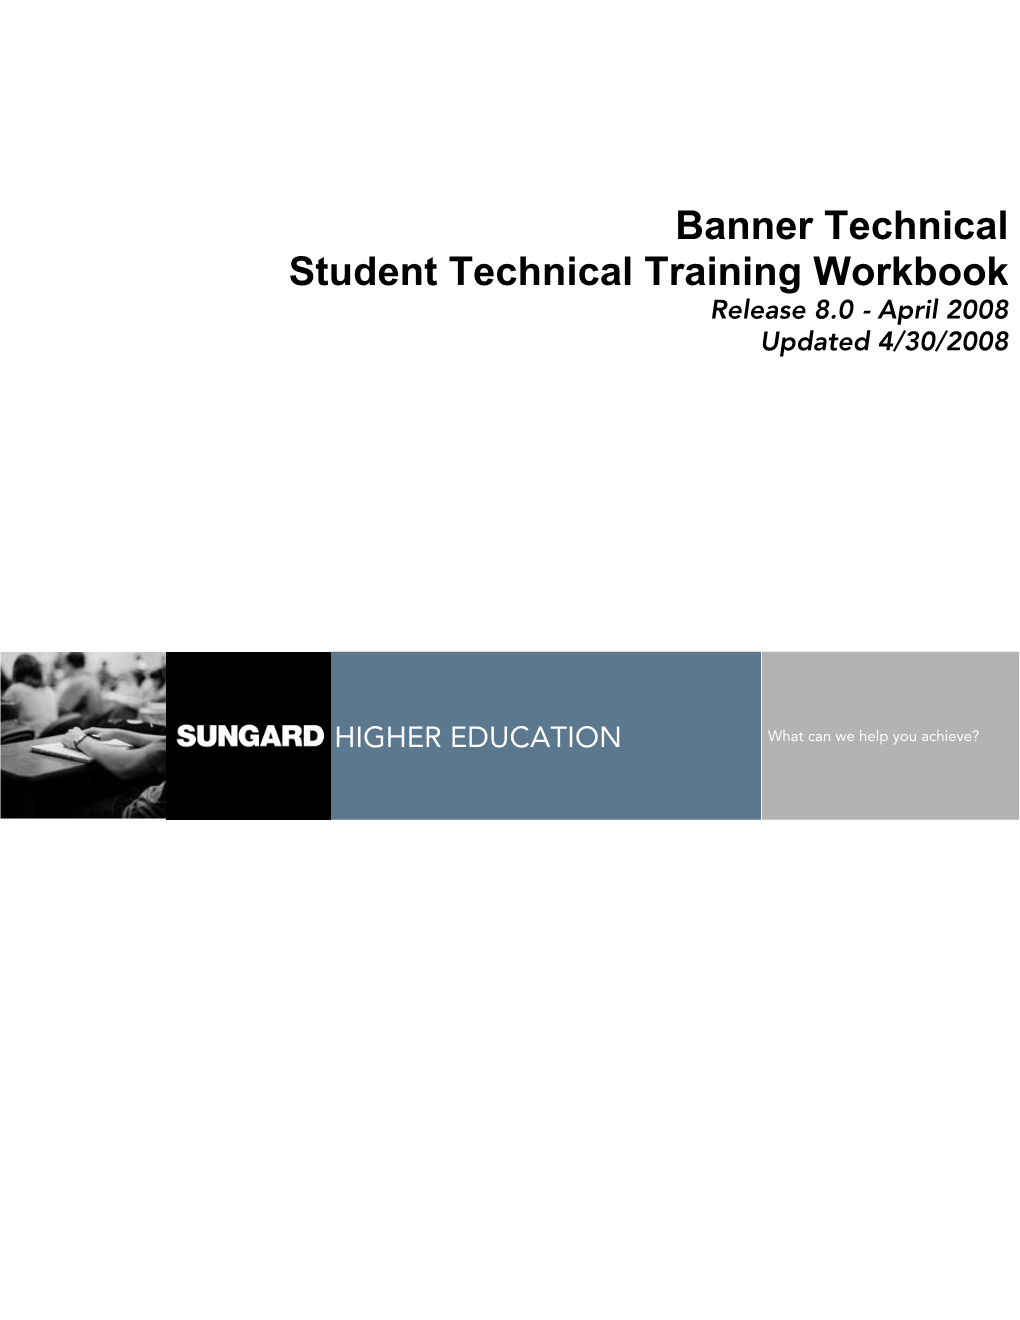 Banner Technical Student Technical Training Workbook Release 8.0 - April 2008 Updated 4/30/2008